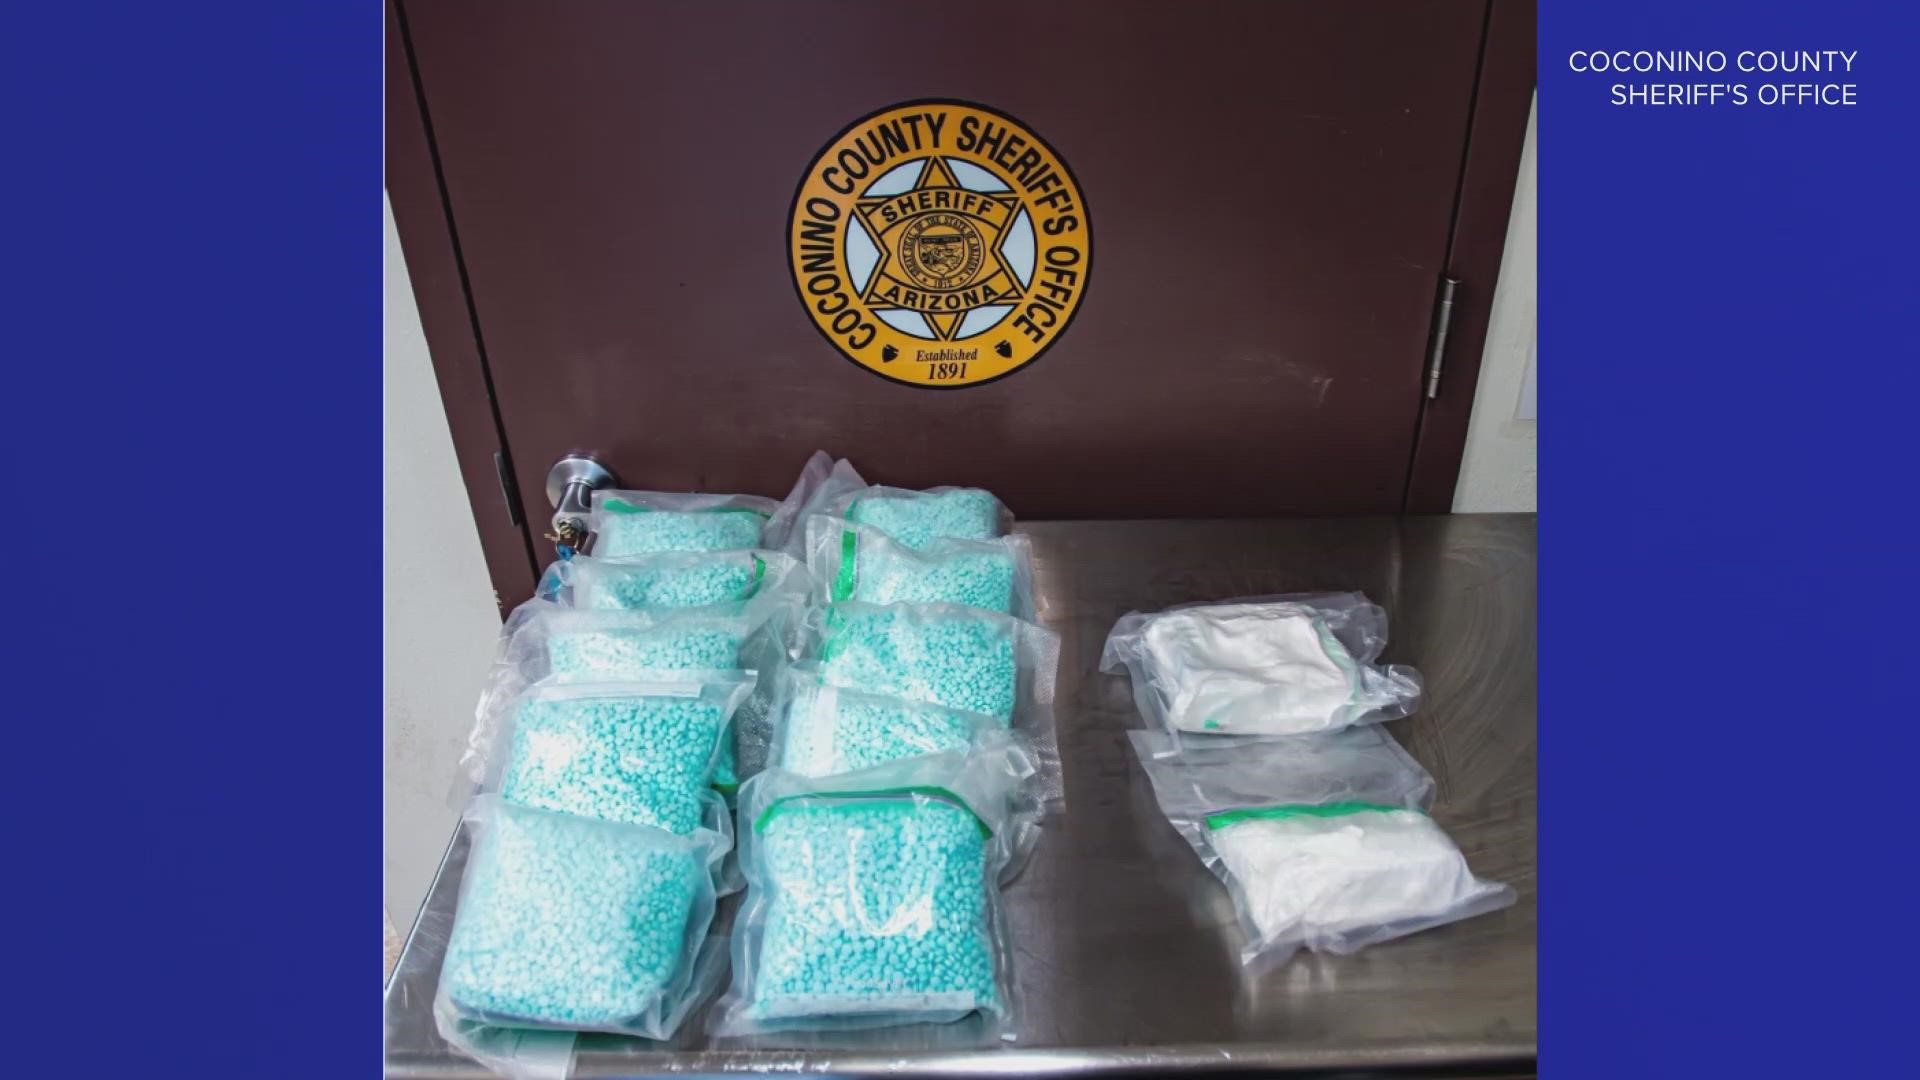 The Coconino County Sheriff's Office said that the drugs were seized from a California resident who was driving to Phoenix.